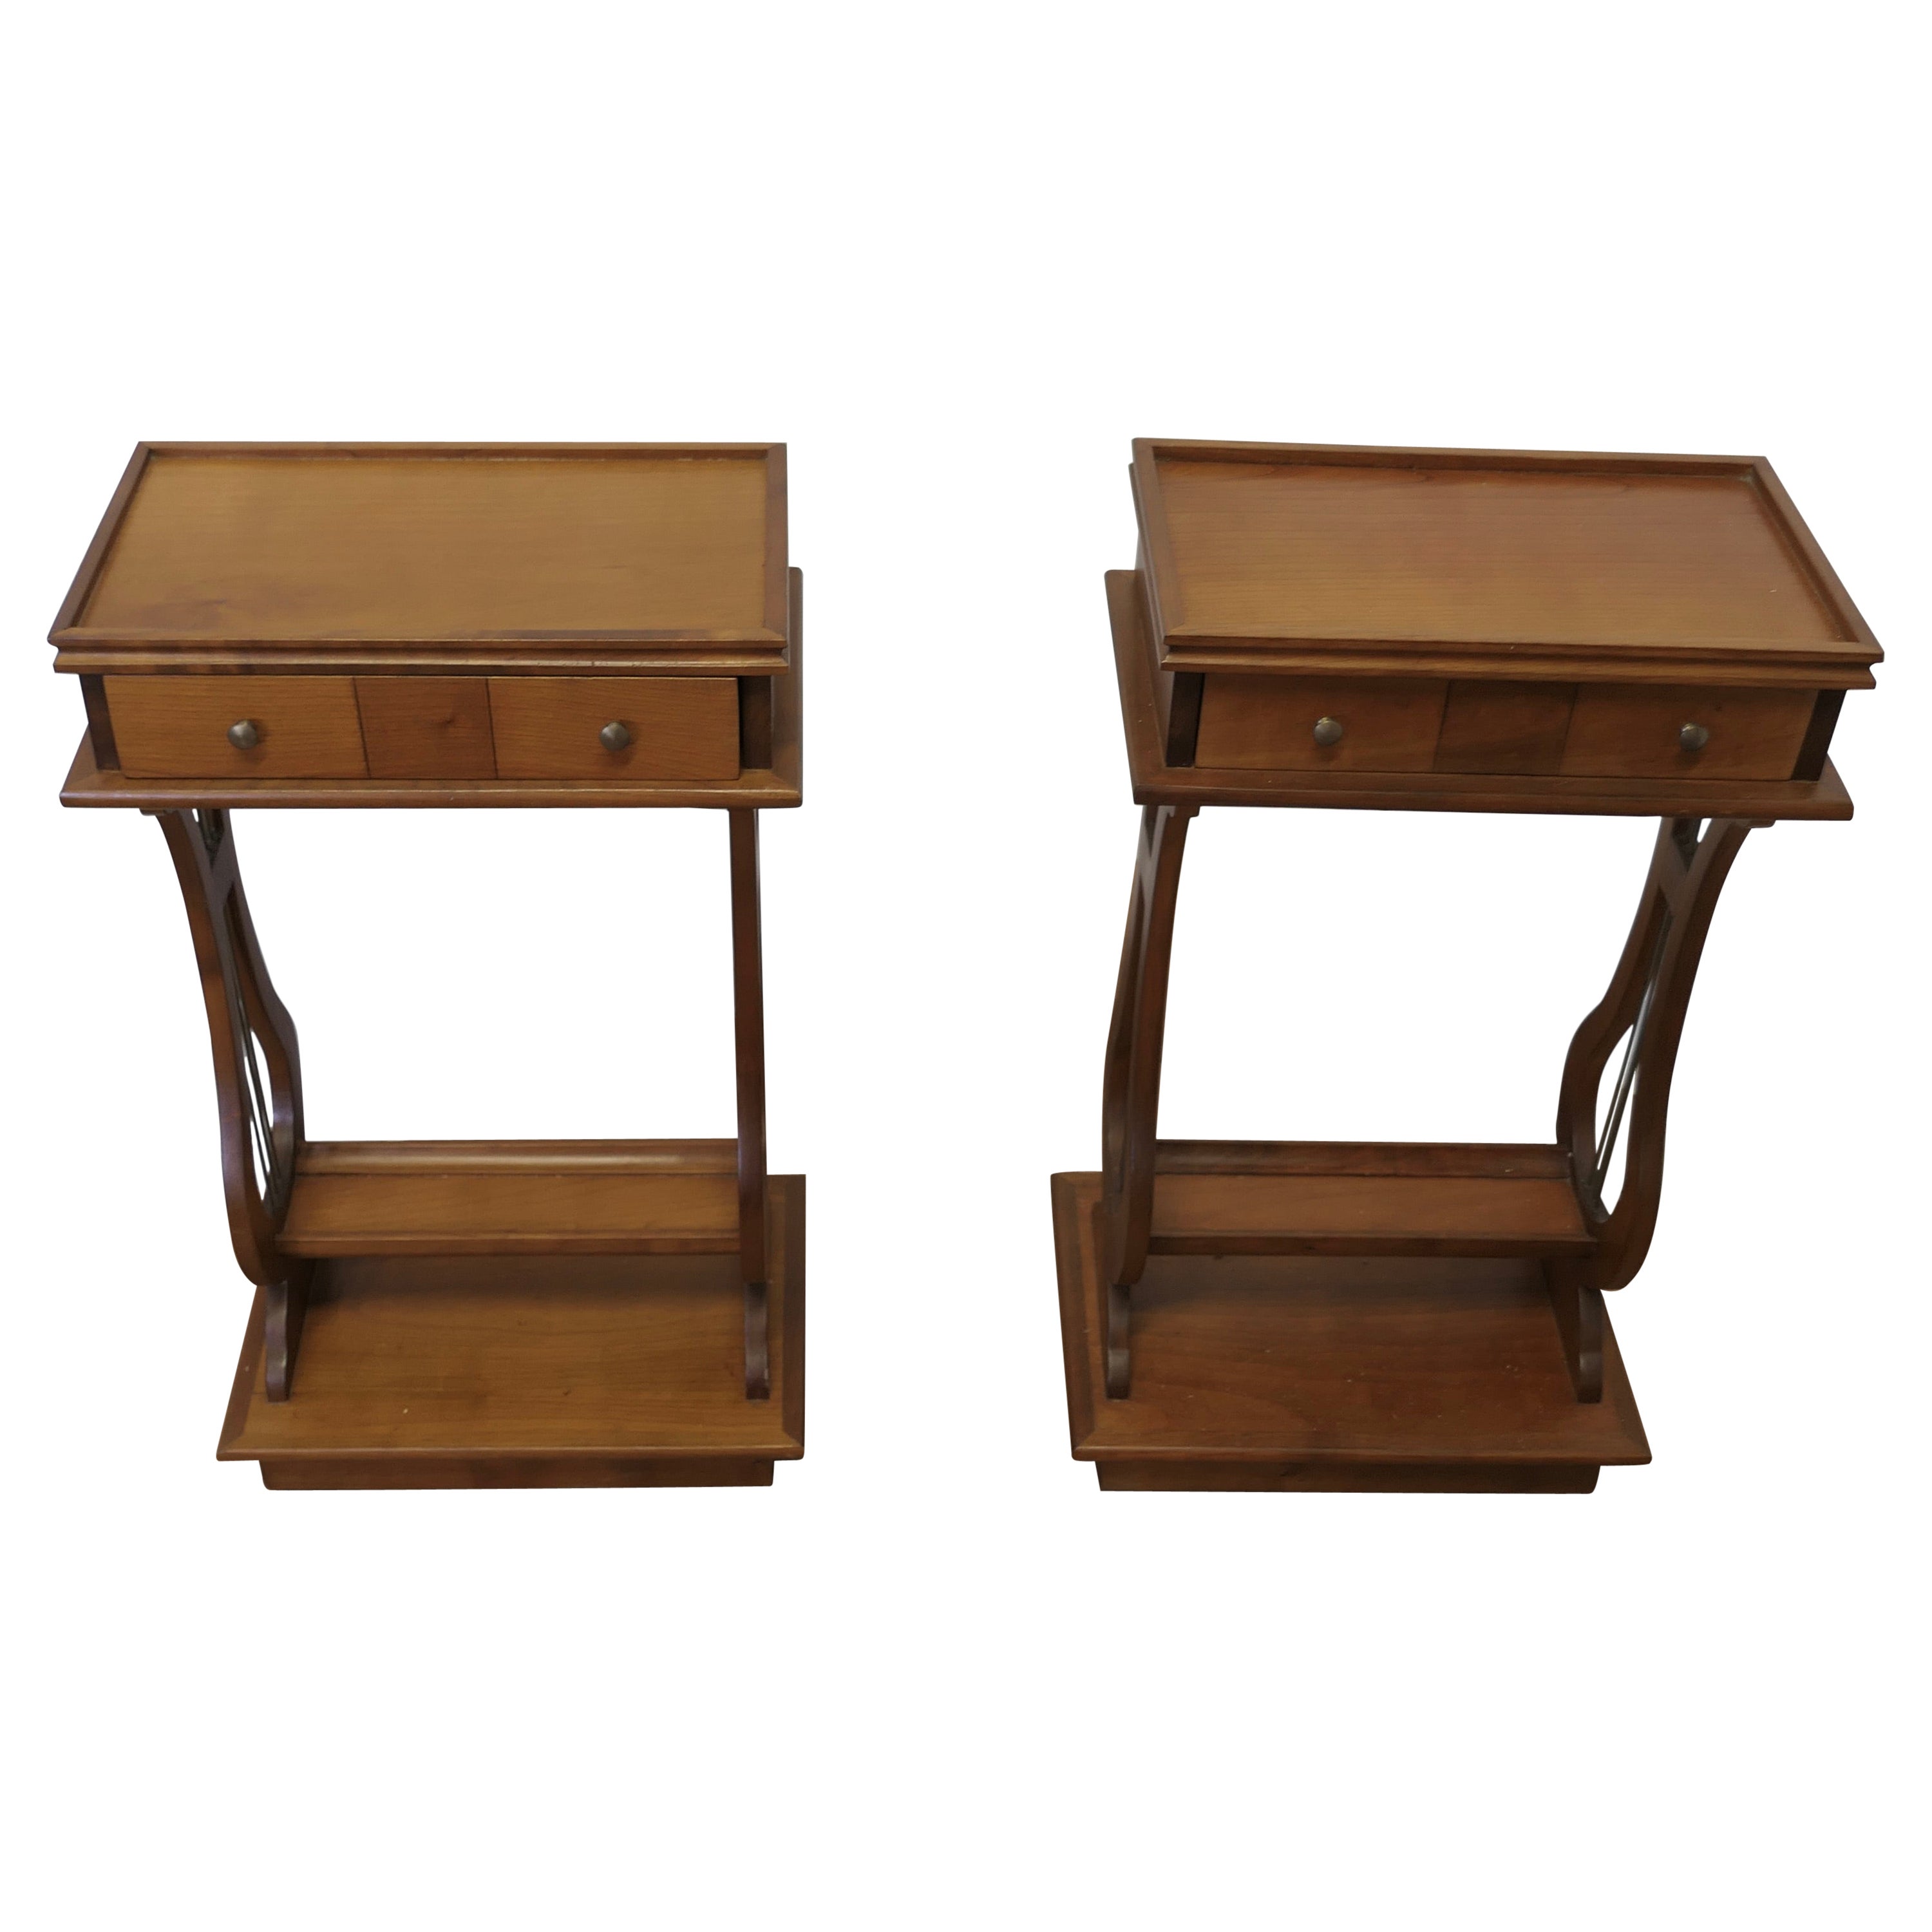 An Unusual Pair of Lyre Ended Cherrywood Lamp or Side Tables    For Sale